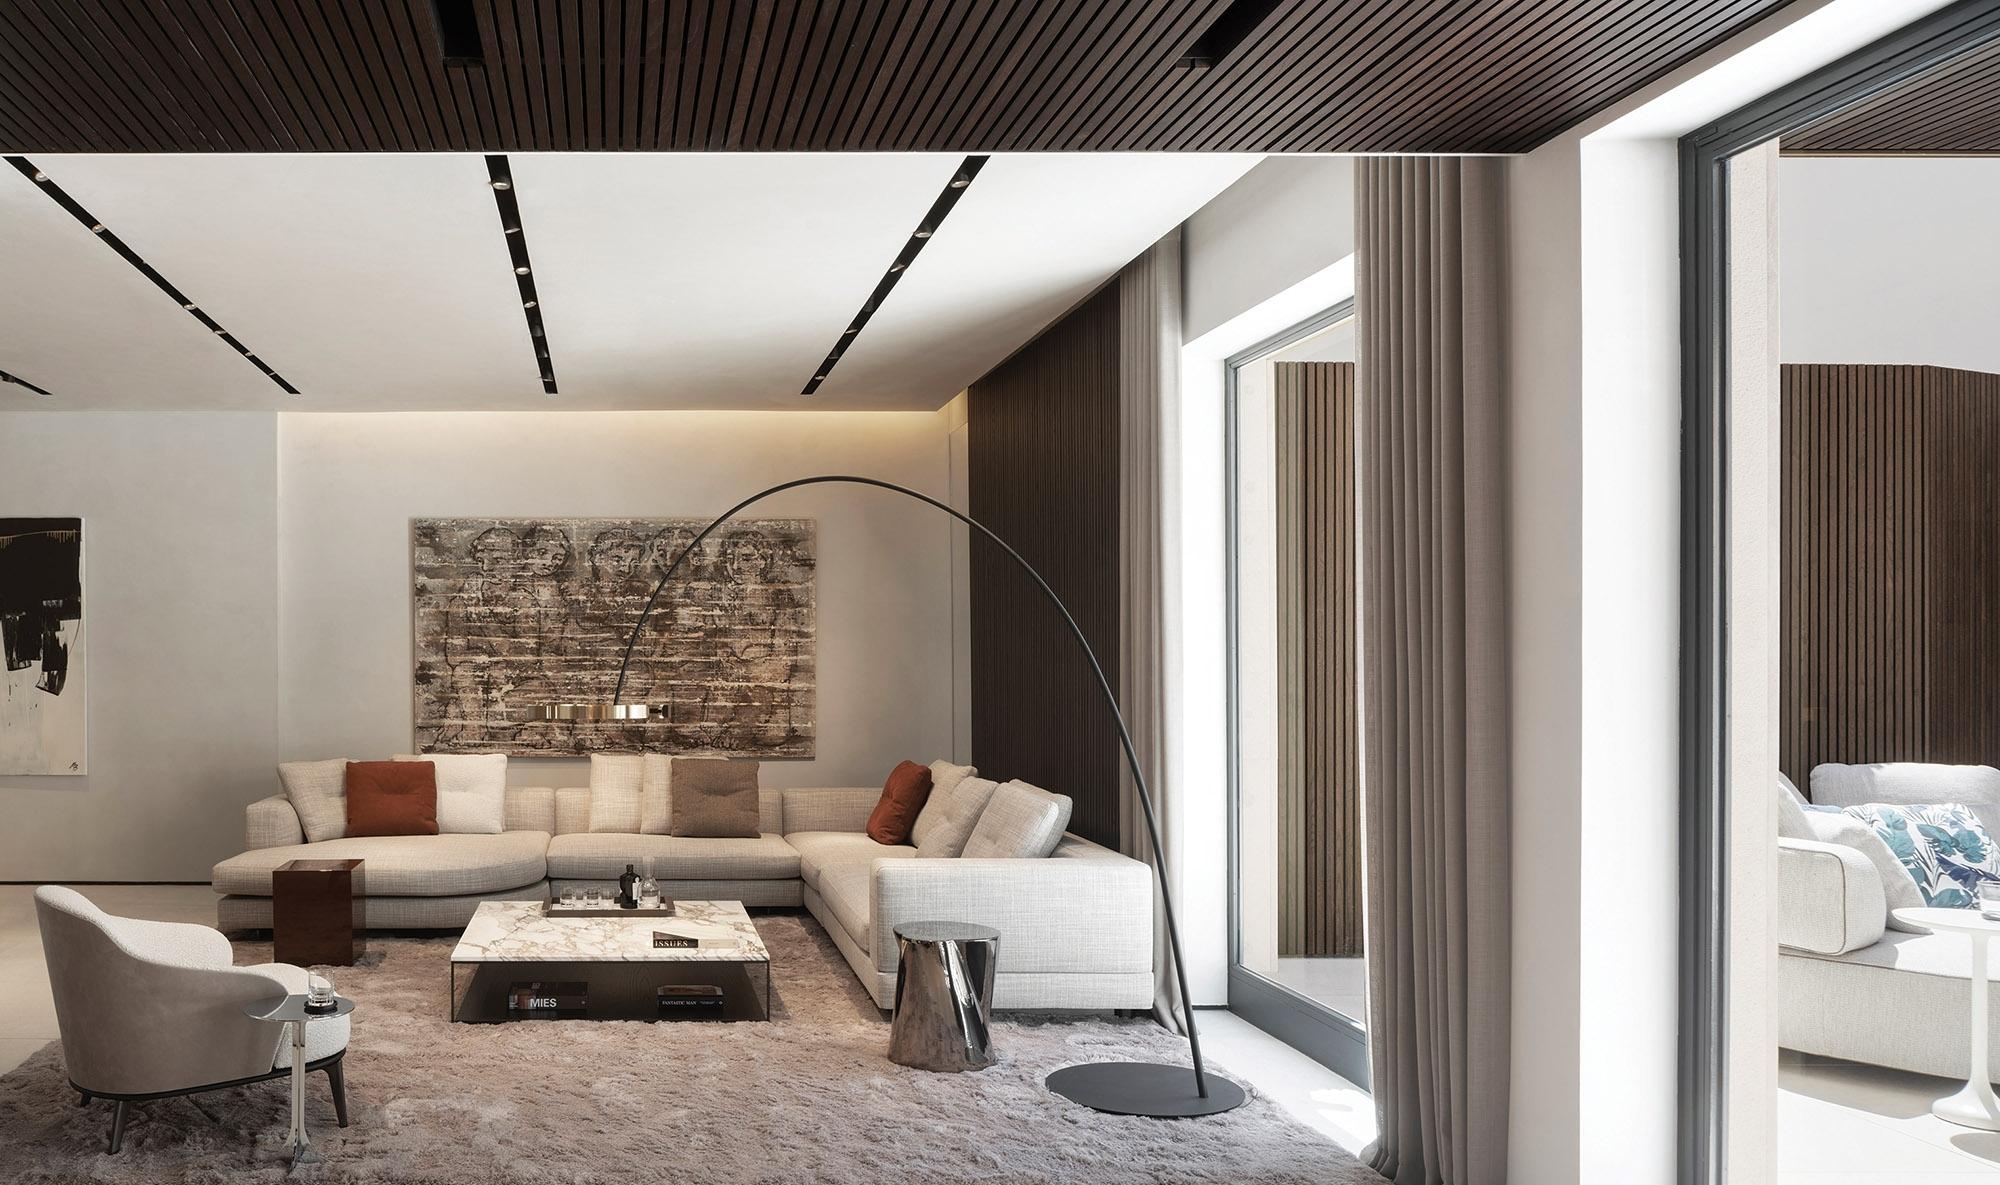 Minotti announces the opening of a brand-new flagship store in Palma de Mallorca